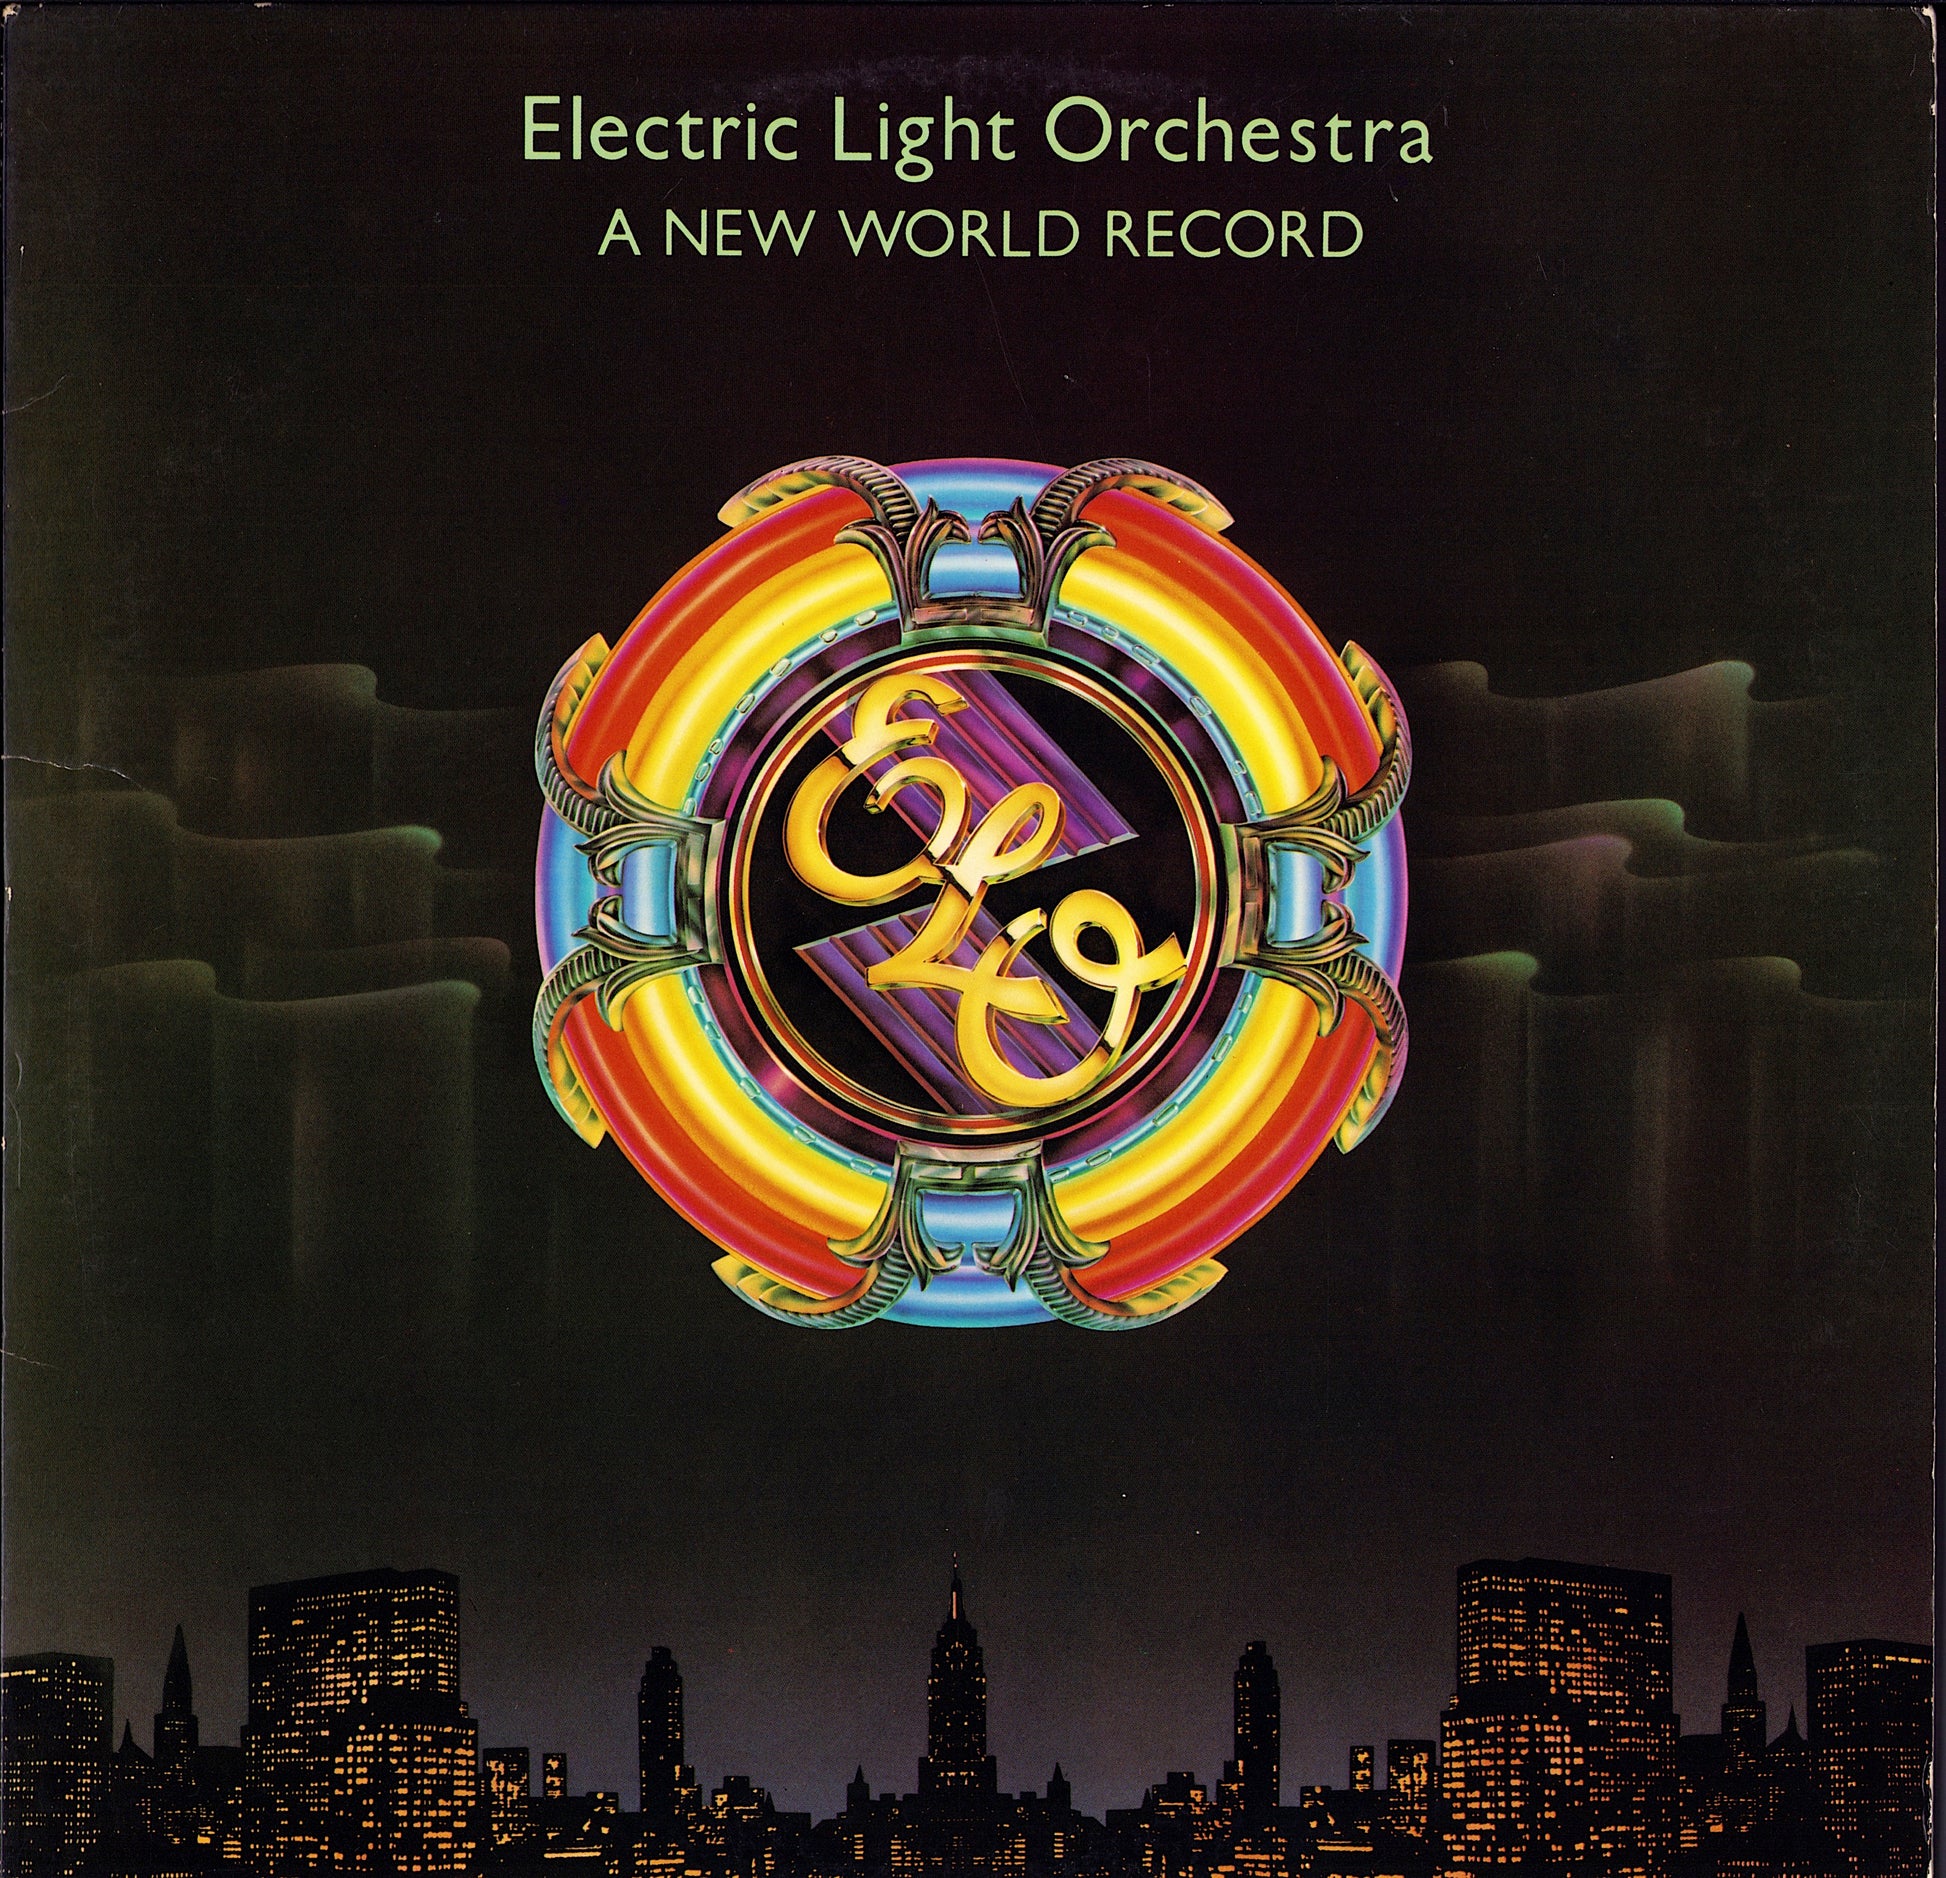 Electric Light Orchestra ‎- A New World Record Vinyl LP US